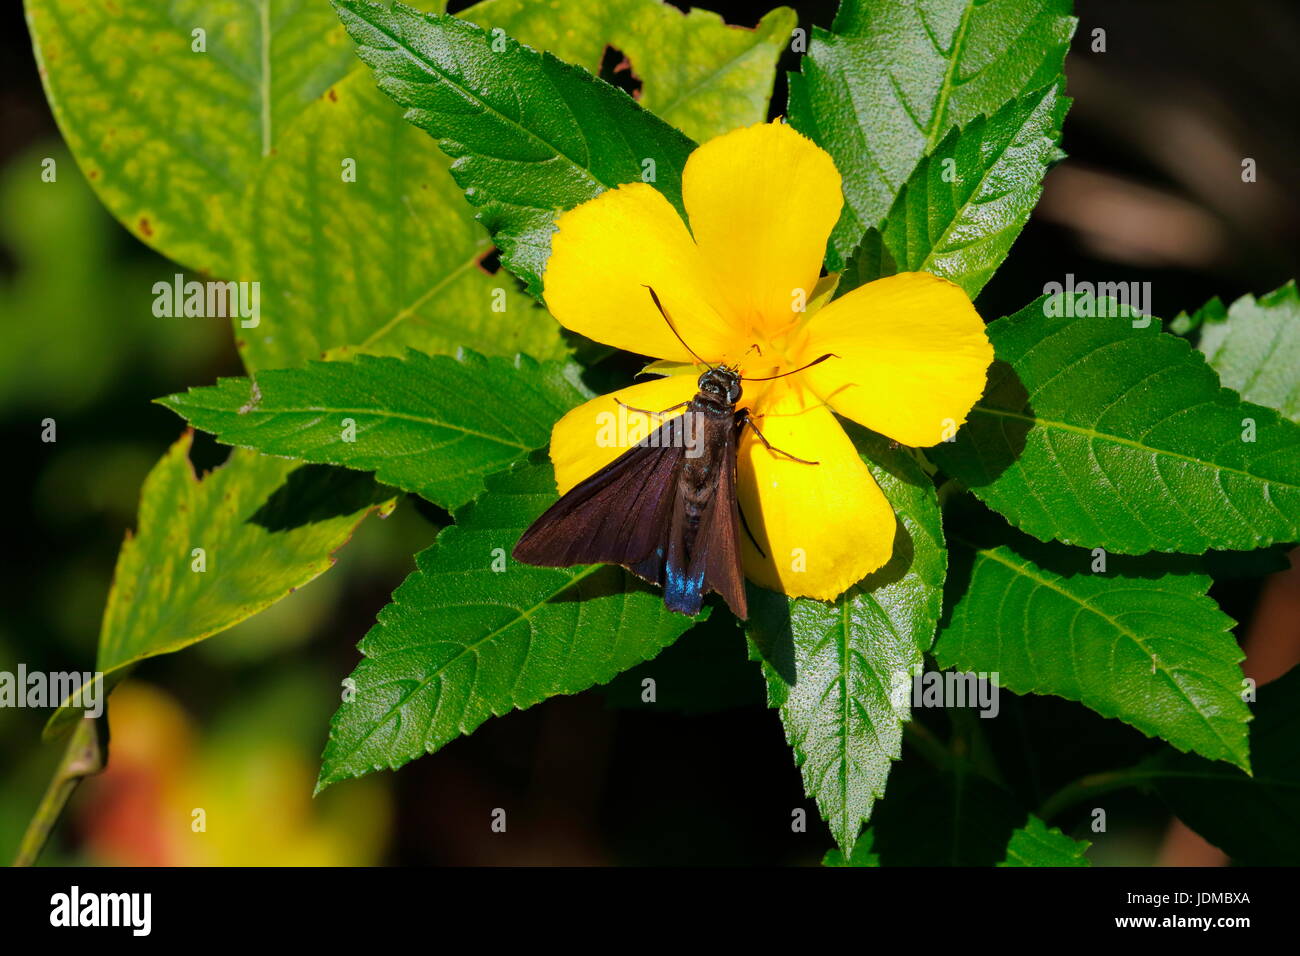 A mangrove skipper butterfly, Phocides pigmalion, sipping nectar from a yellow flower. Stock Photo